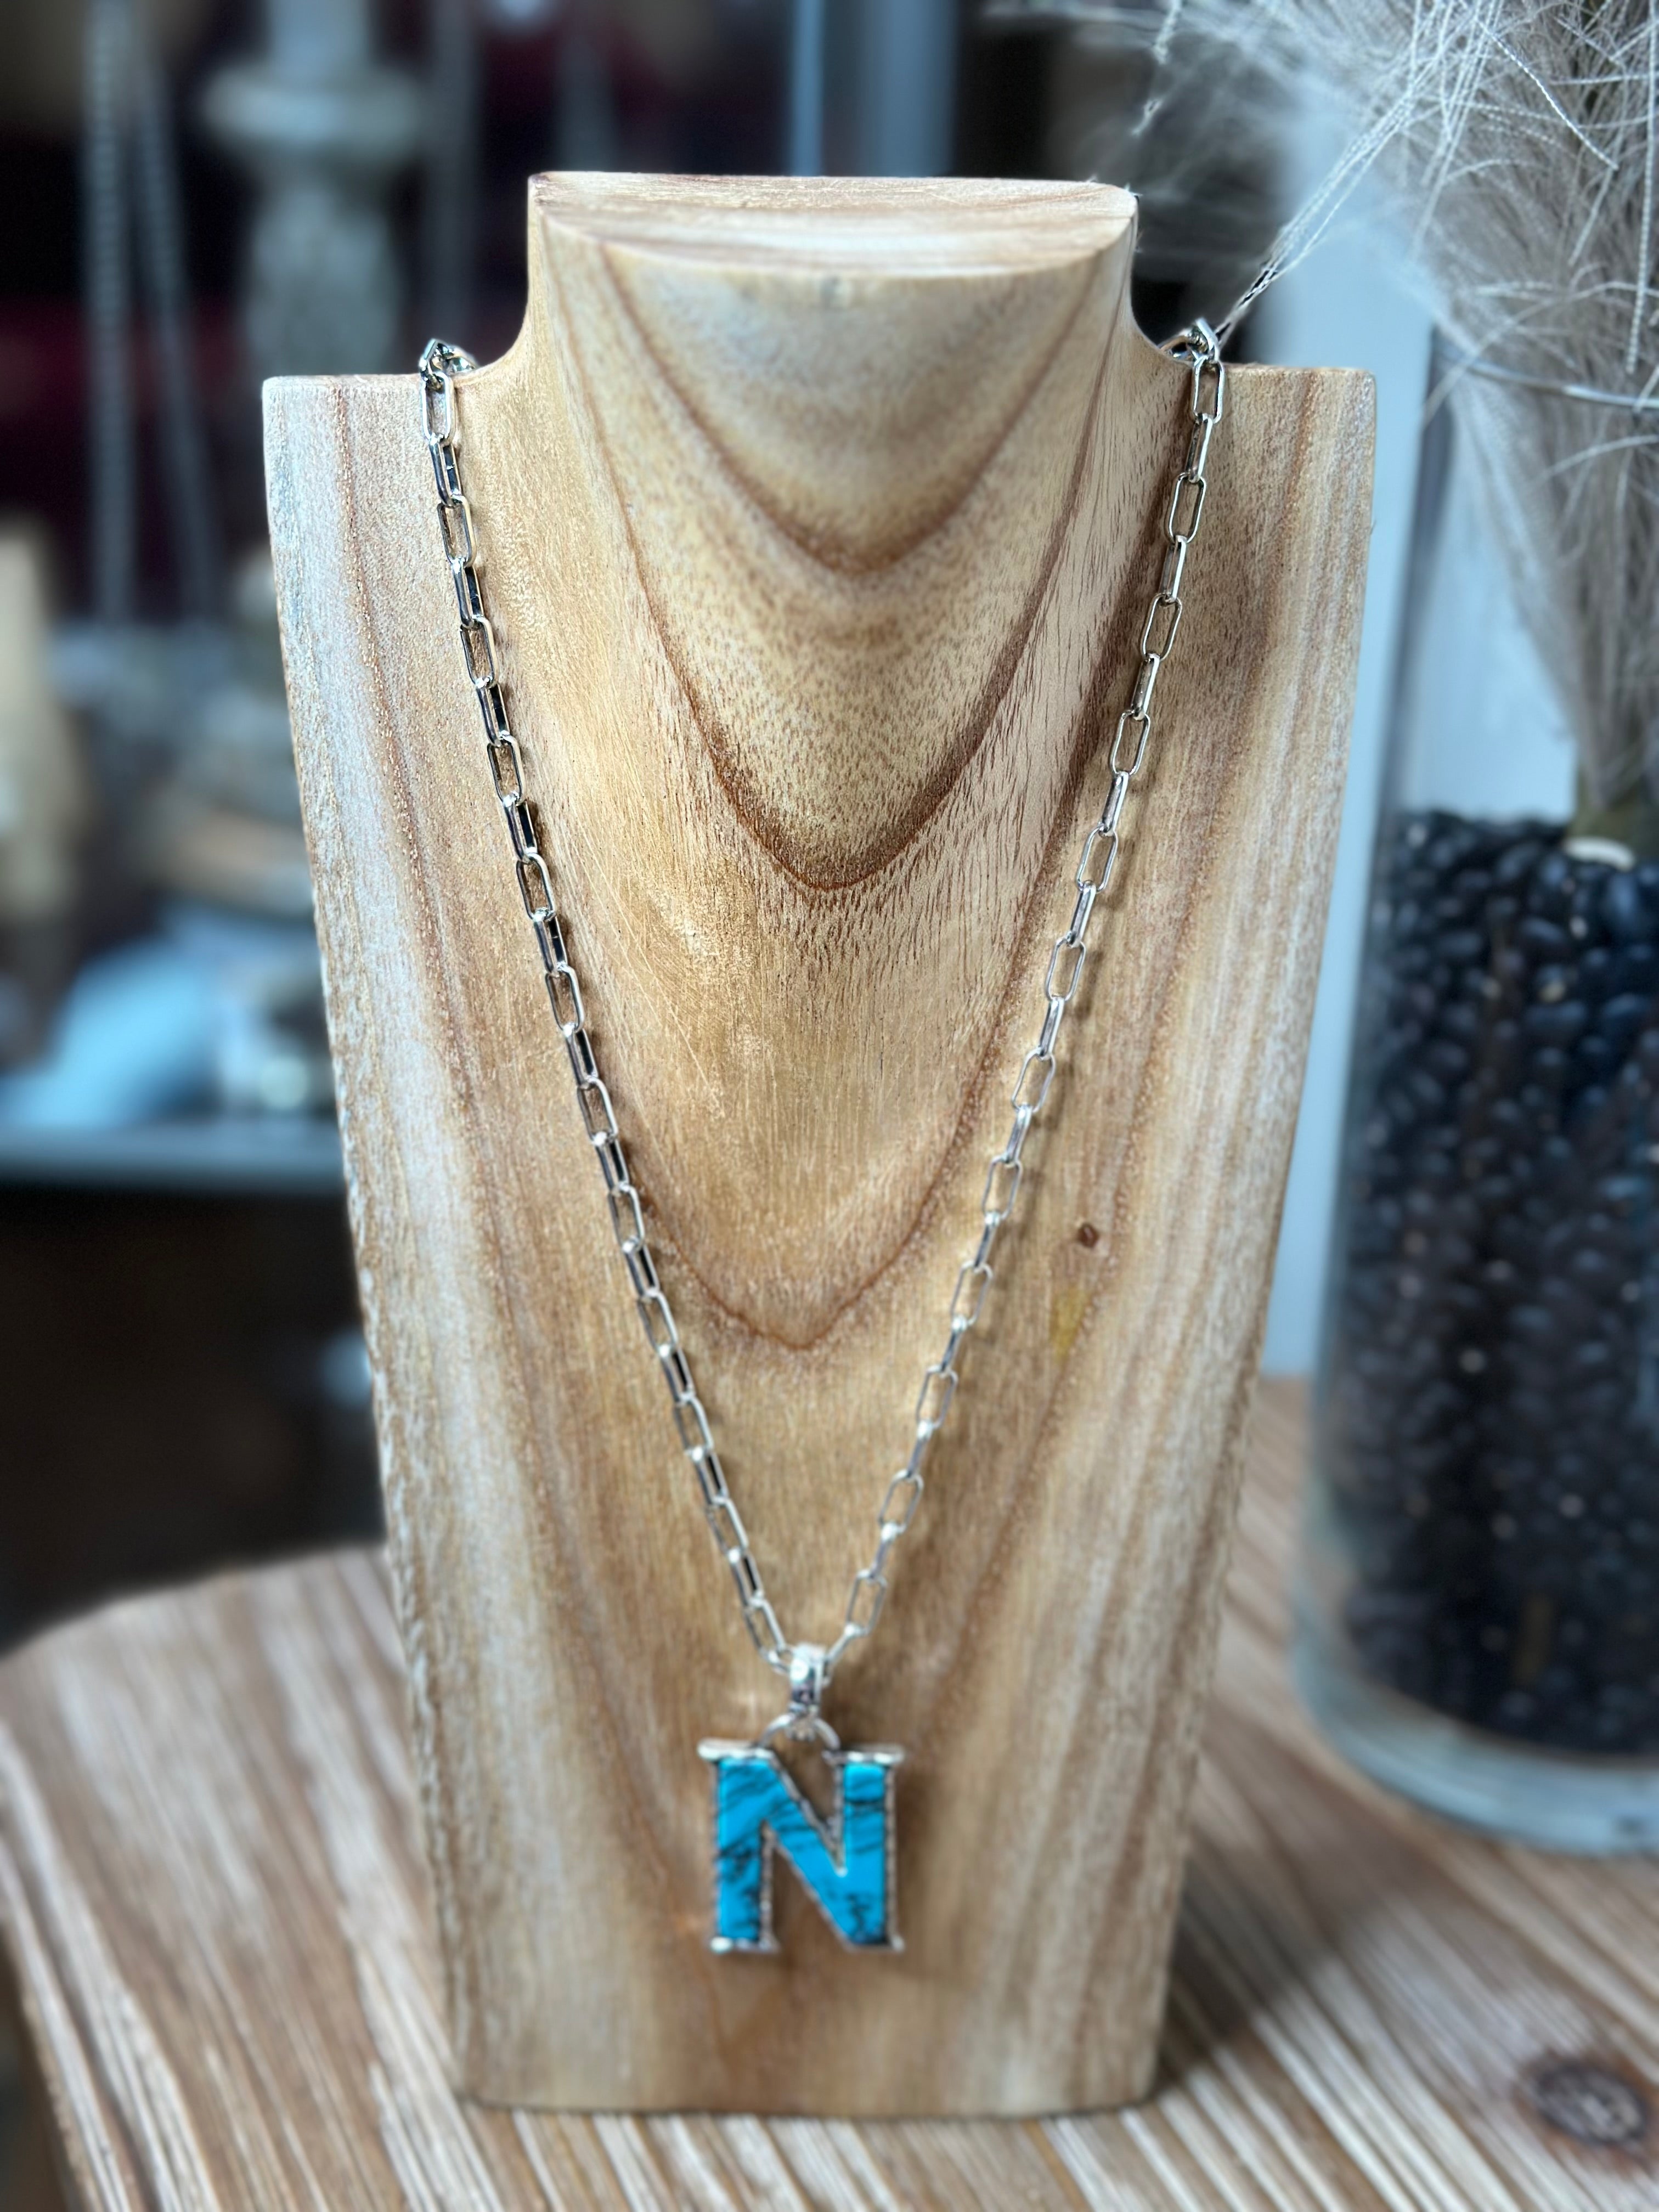 A-W Turquoise Antique Silver Letter Chain Necklace